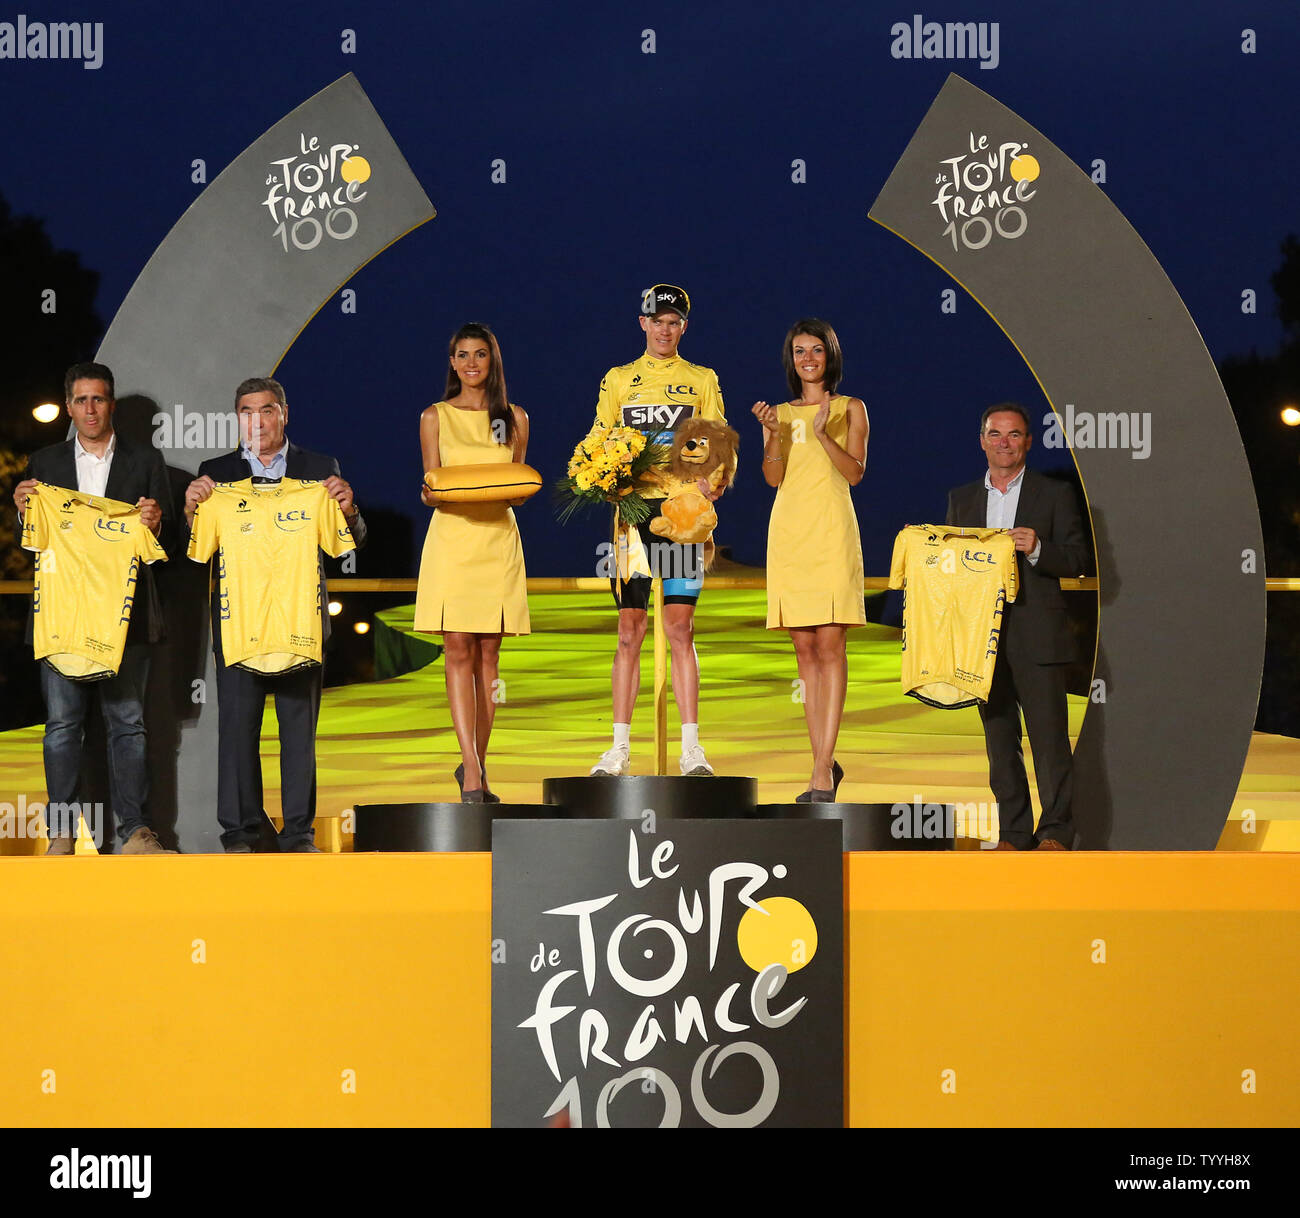 (From L to R) Miguel Indurain of Spain, Eddie Merckx of Belgium, Chris Froome of Great Britain and Bernard Hinault of France arrive on the presentation podium after Froome won the Tour de France in Paris on July 21, 2013.  Froome became Britain's second consecutive Tour winner after Bradley Wiggins won the event last year.   UPI/David Silpa Stock Photo